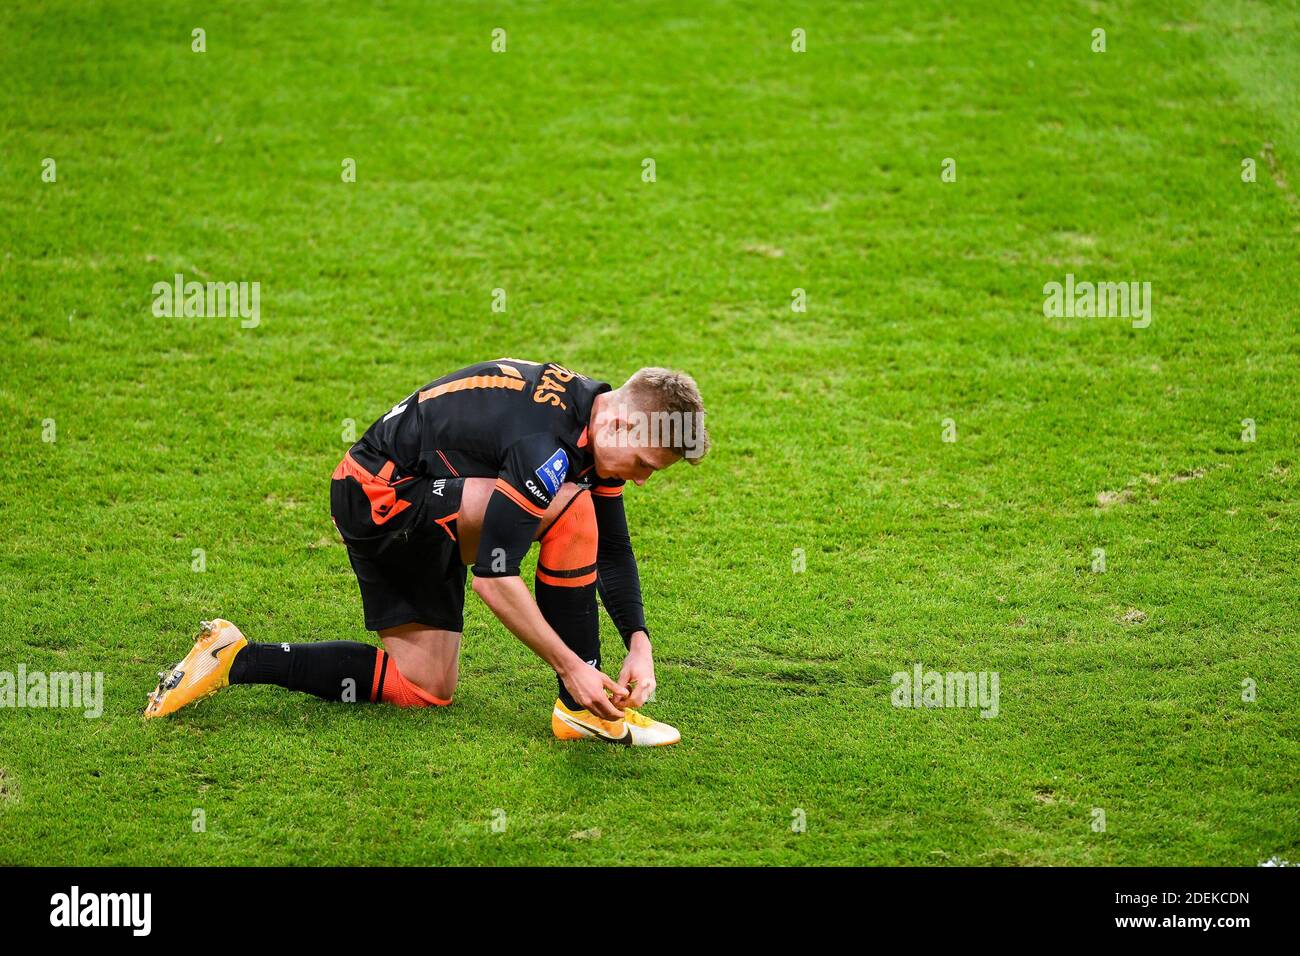 Michal Skoras High Resolution Stock Photography and Images - Alamy